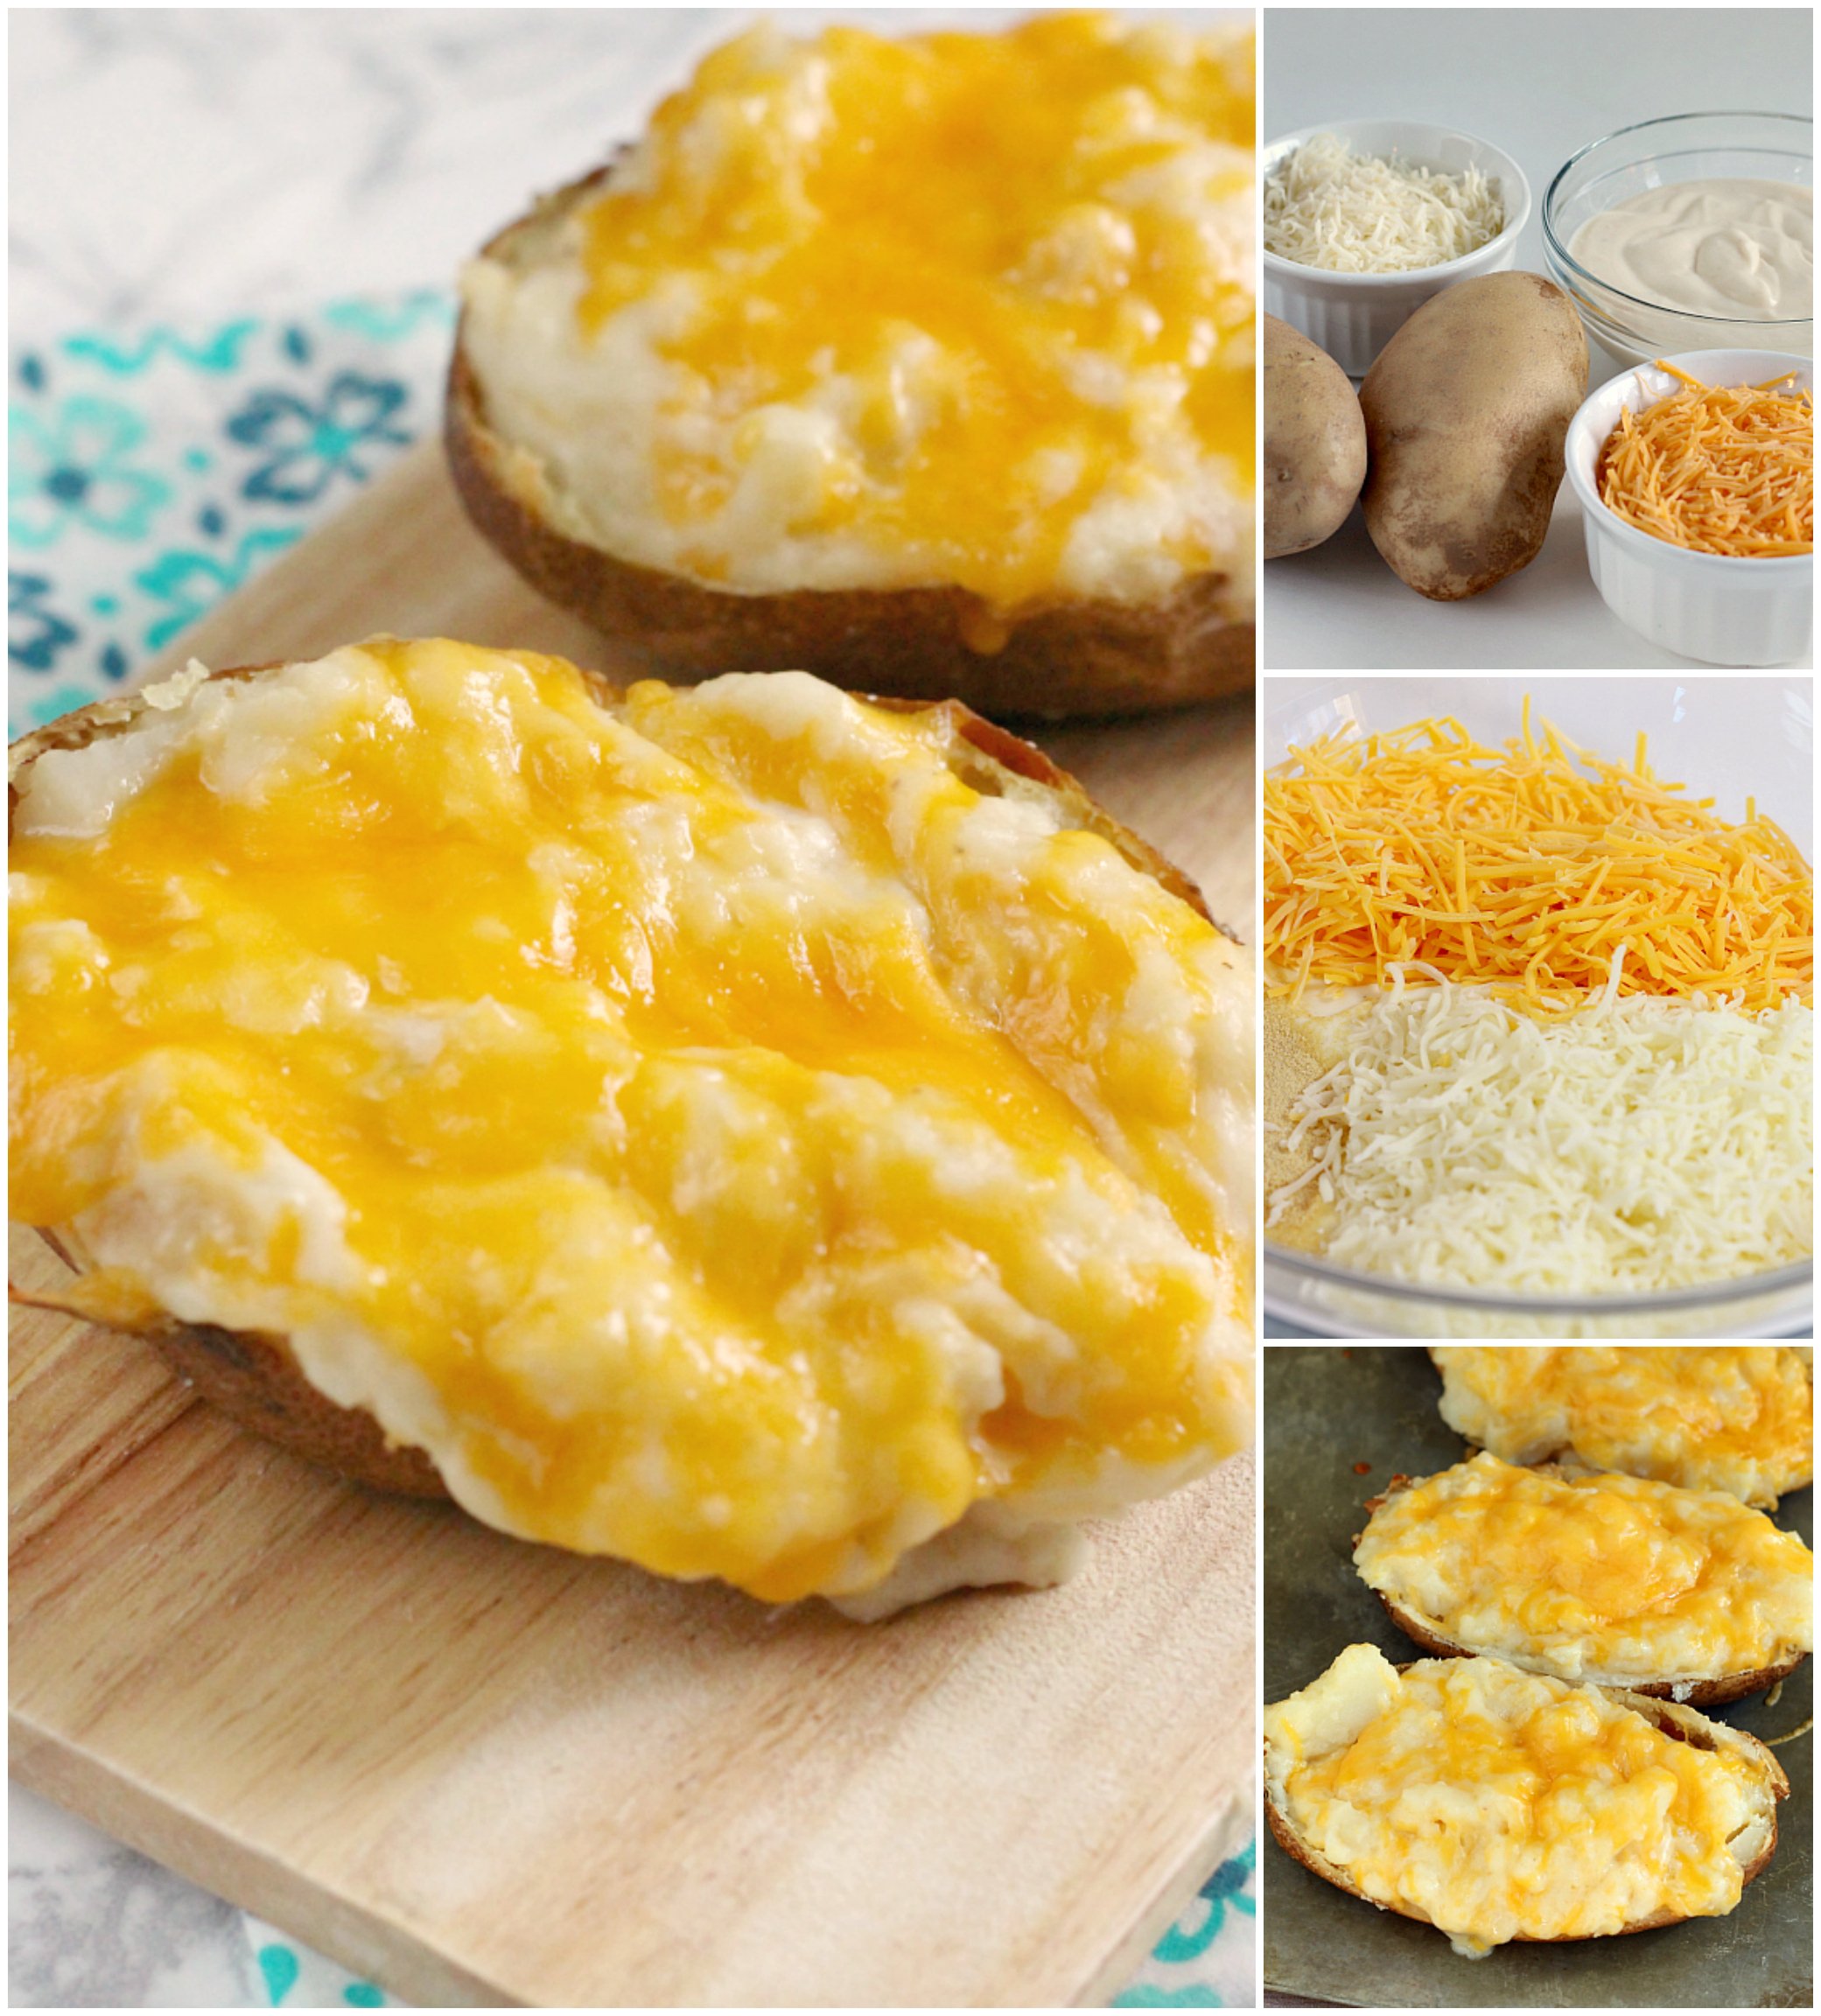 Alfredo Twice Baked Potatoes are the perfect side dish for any meal! We love baked potatoes and they are even better when you add alfredo sauce and two different kinds of cheese!